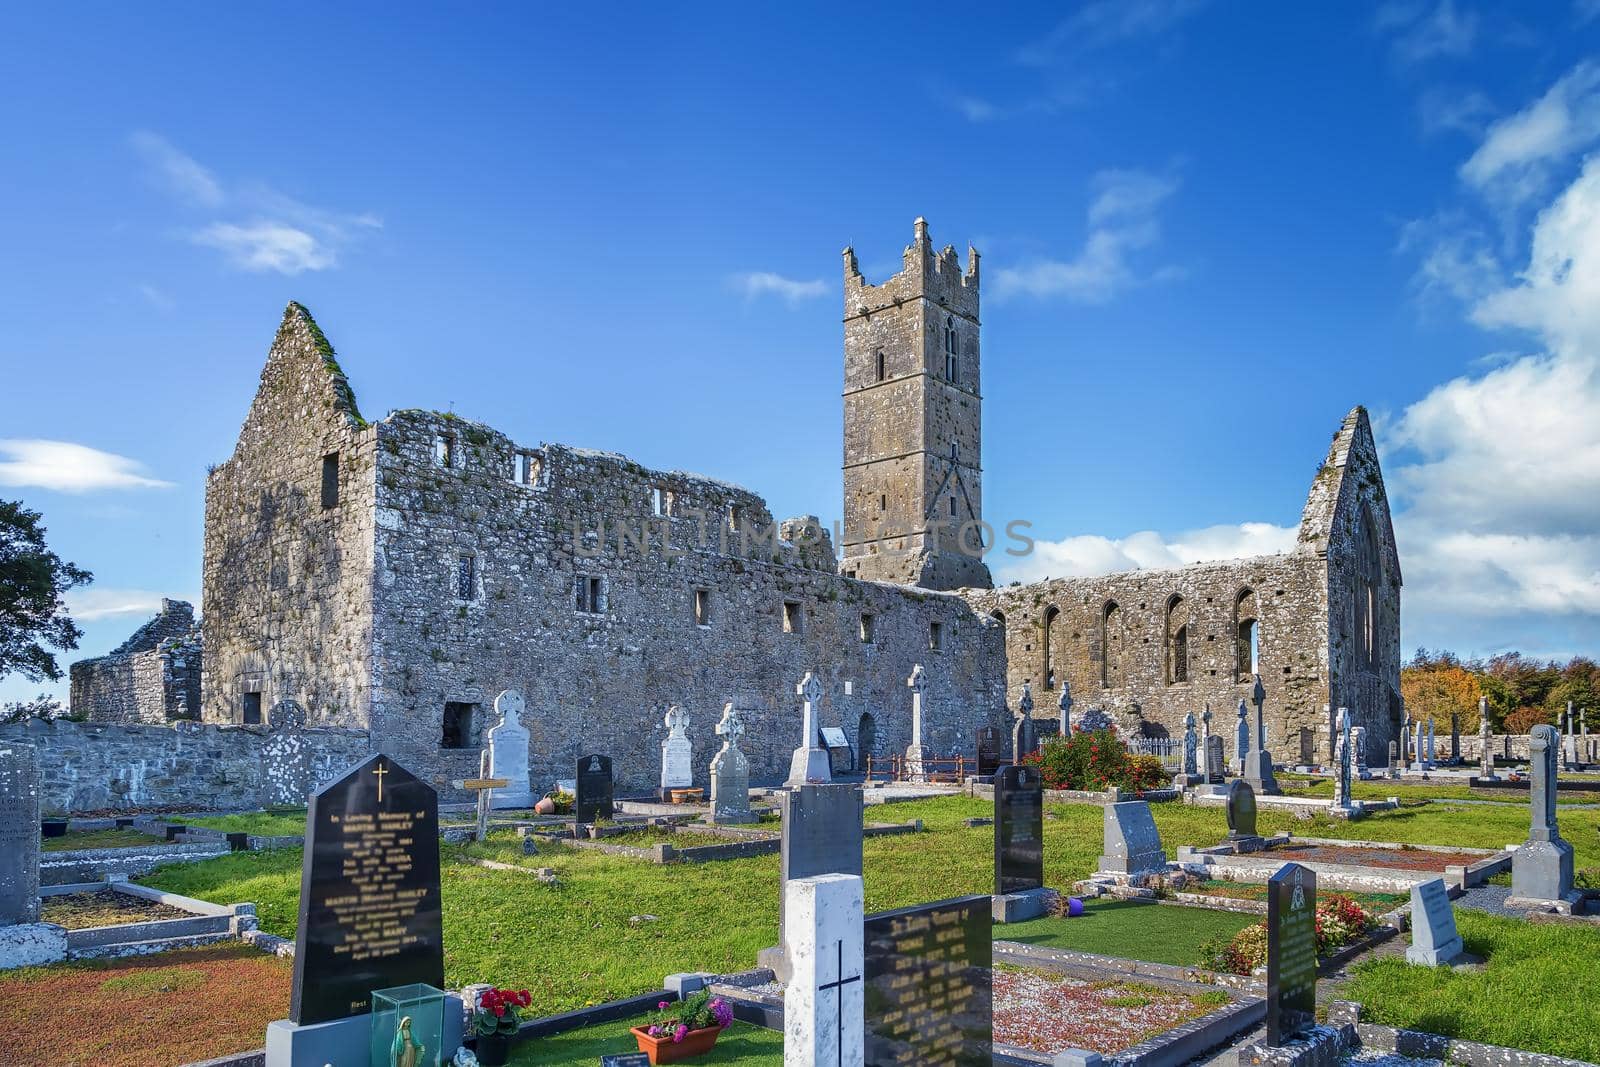 Claregalway Friary is a medieval Franciscan abbey located in the town of Claregalway, County Galway, Ireland.